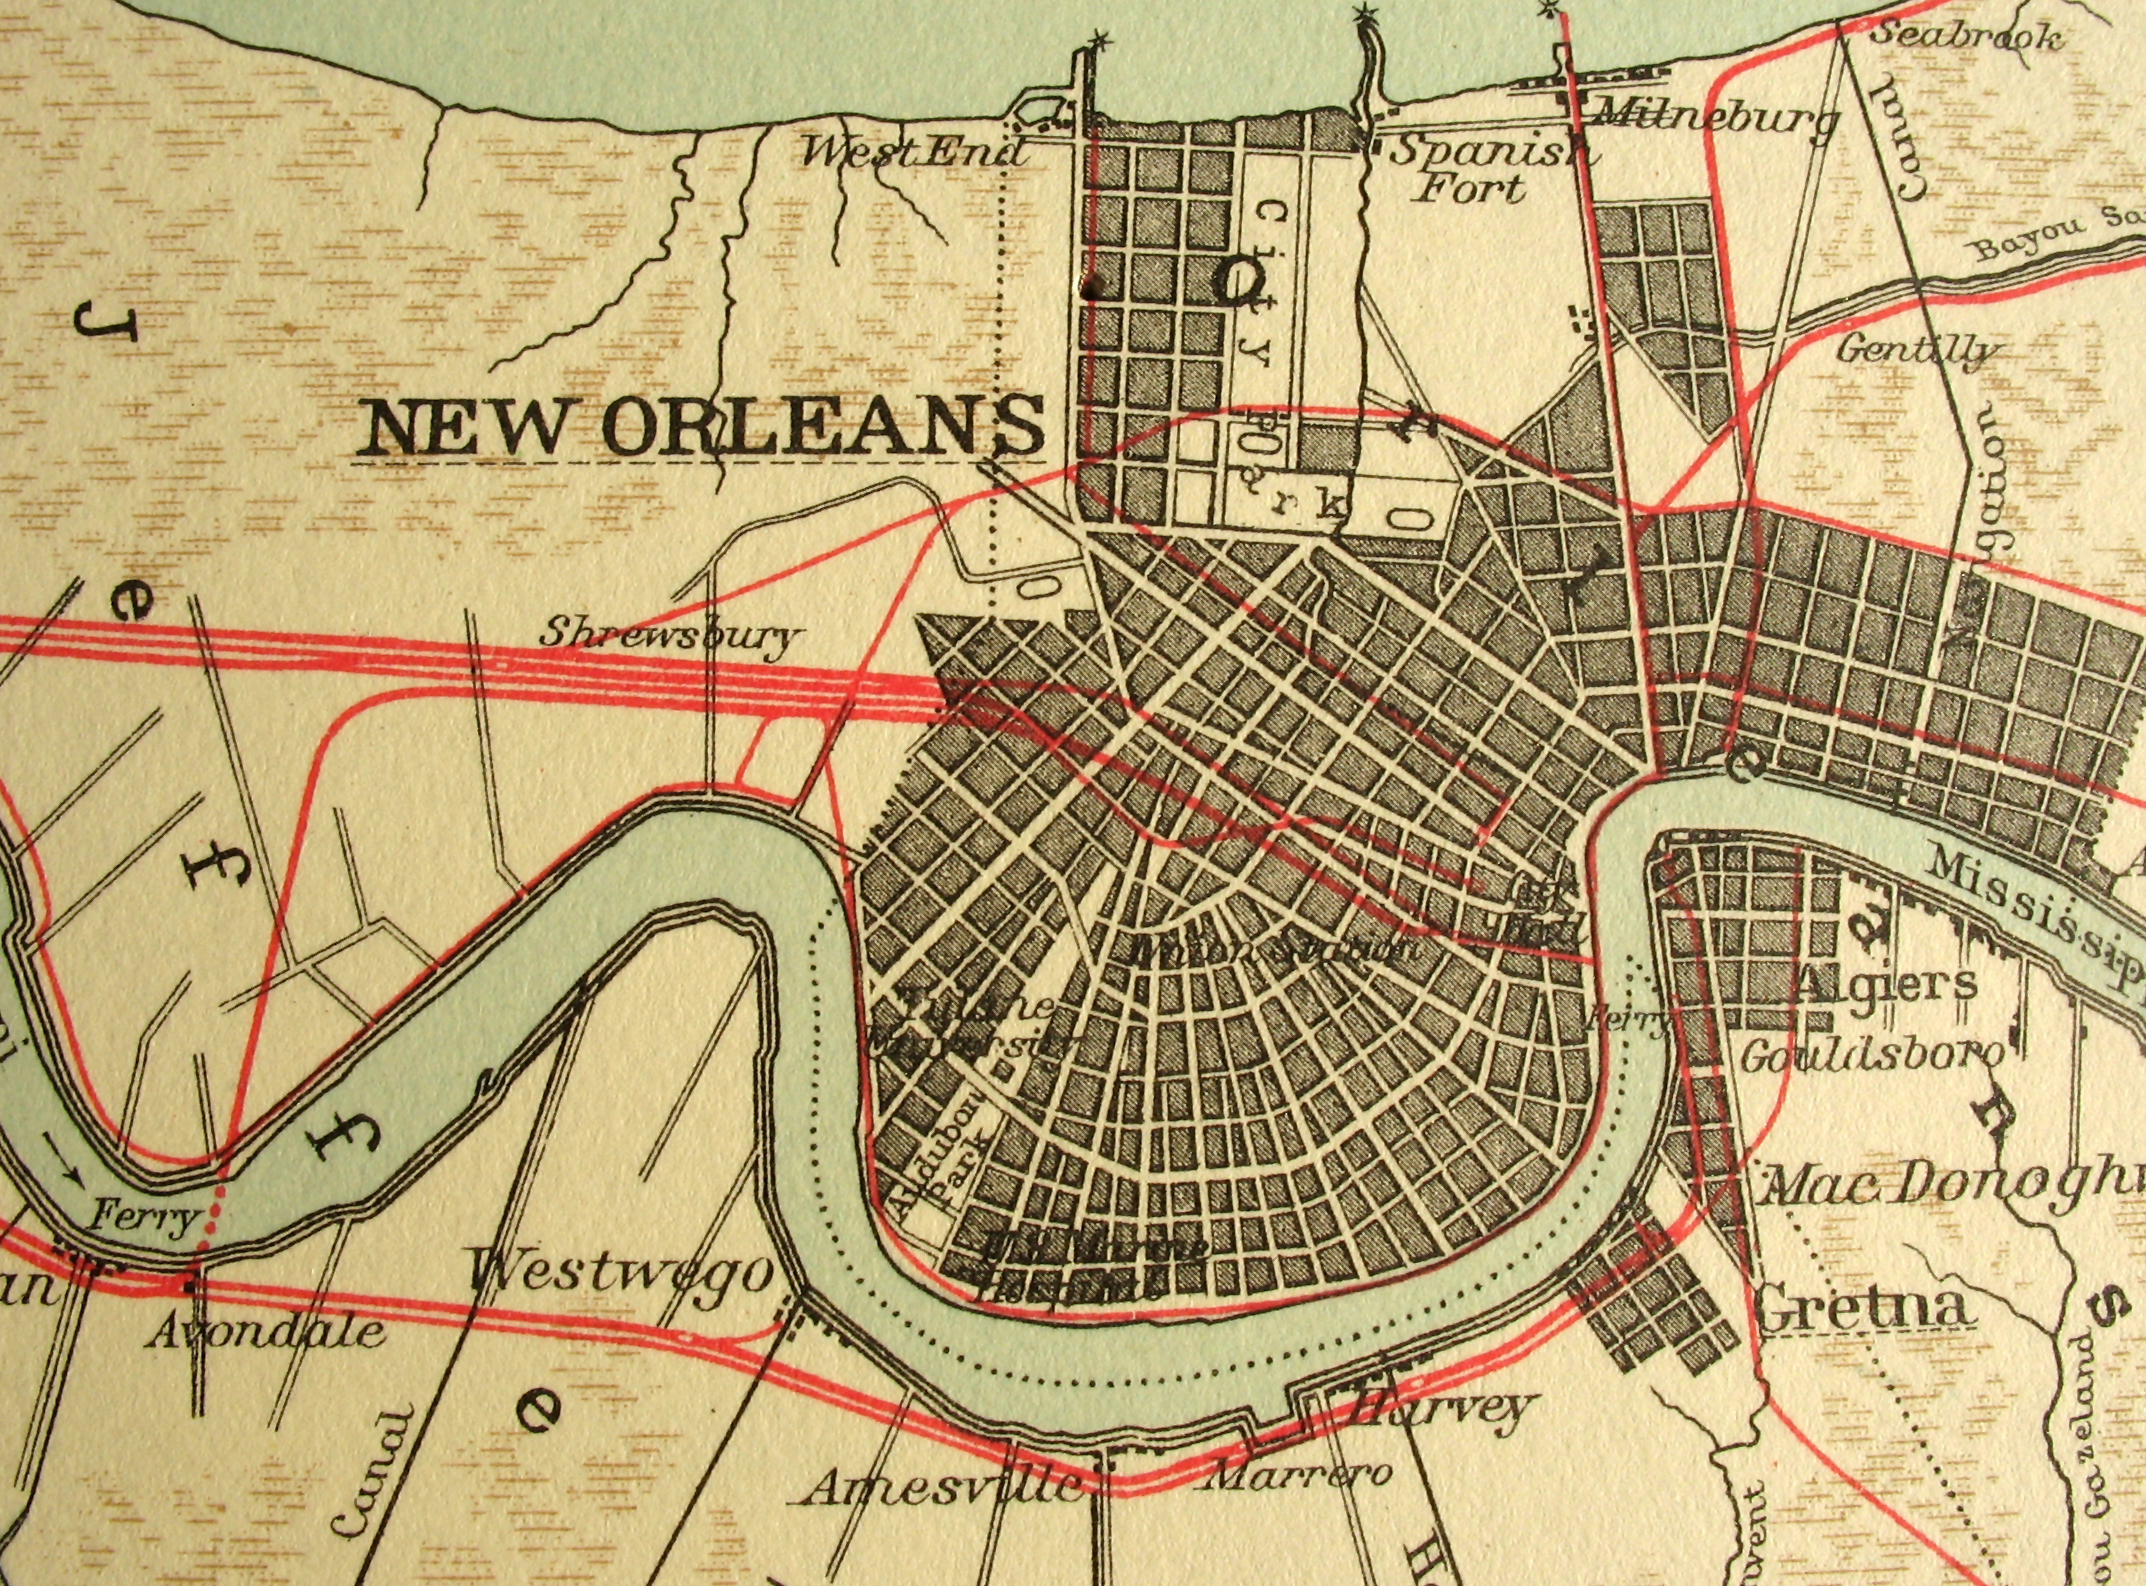 the way we looked at new orleans in 1949.